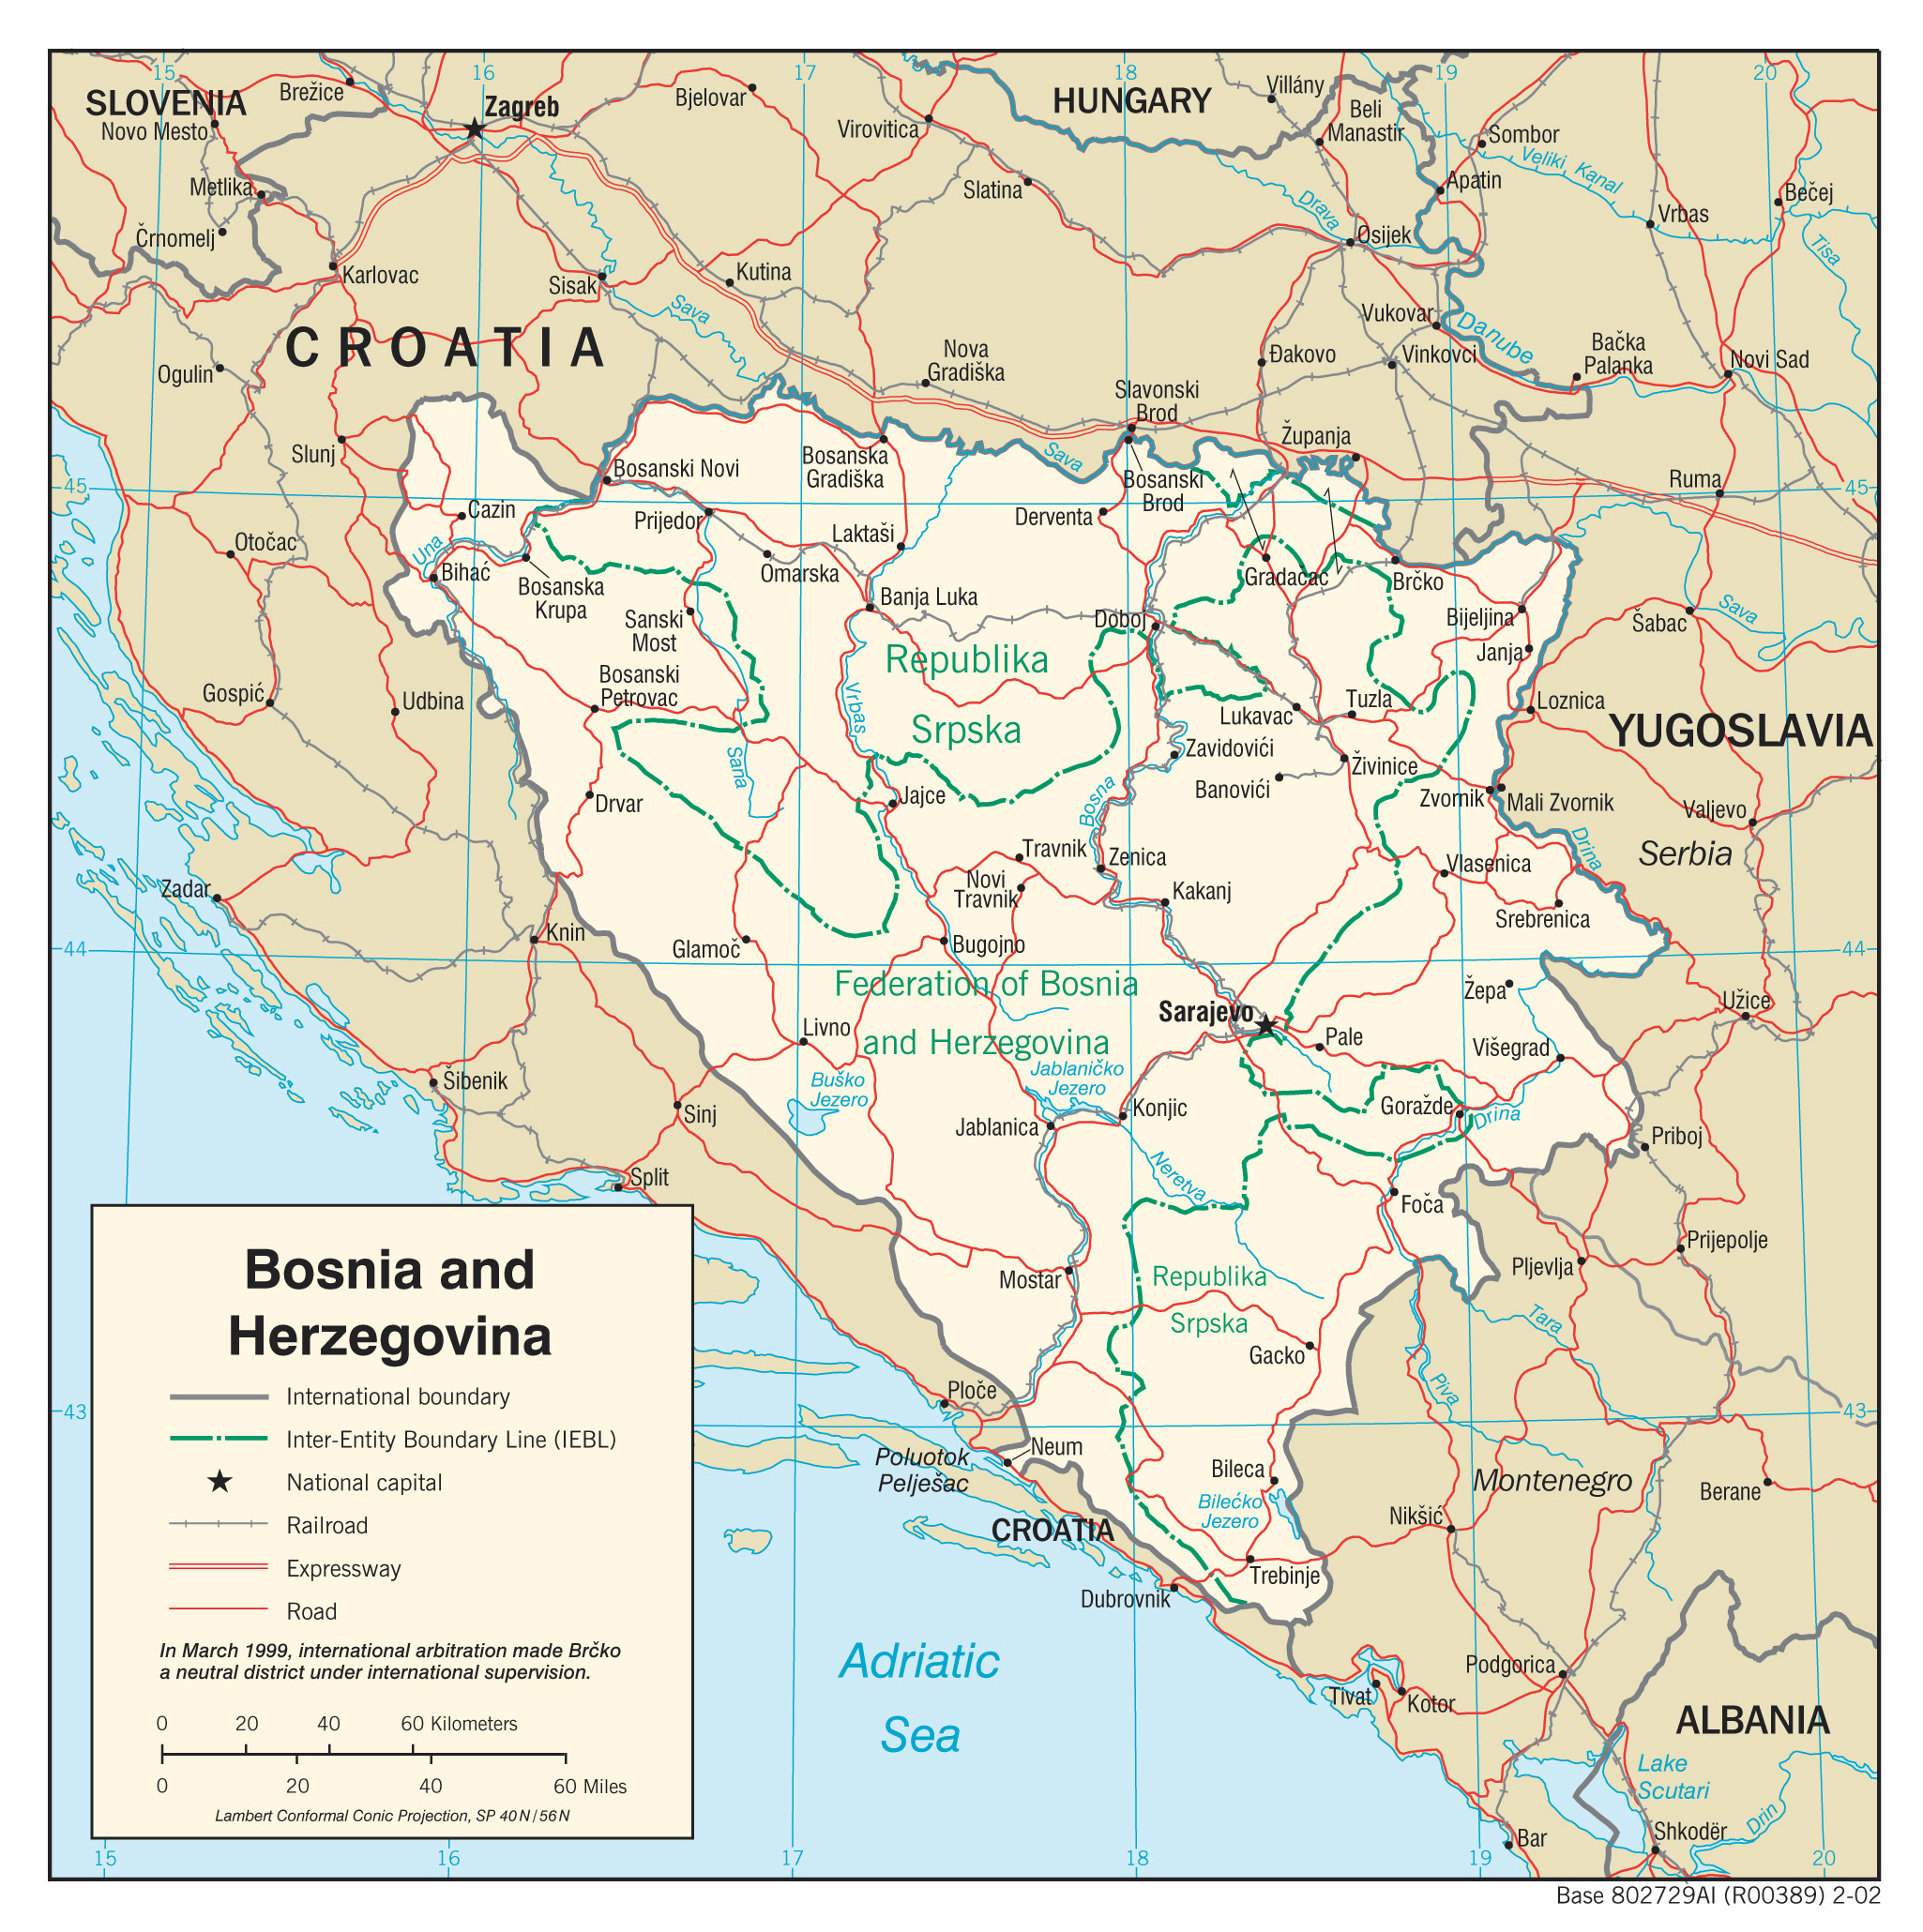 Large Detailed Political And Administrative Map Of Bosnia And